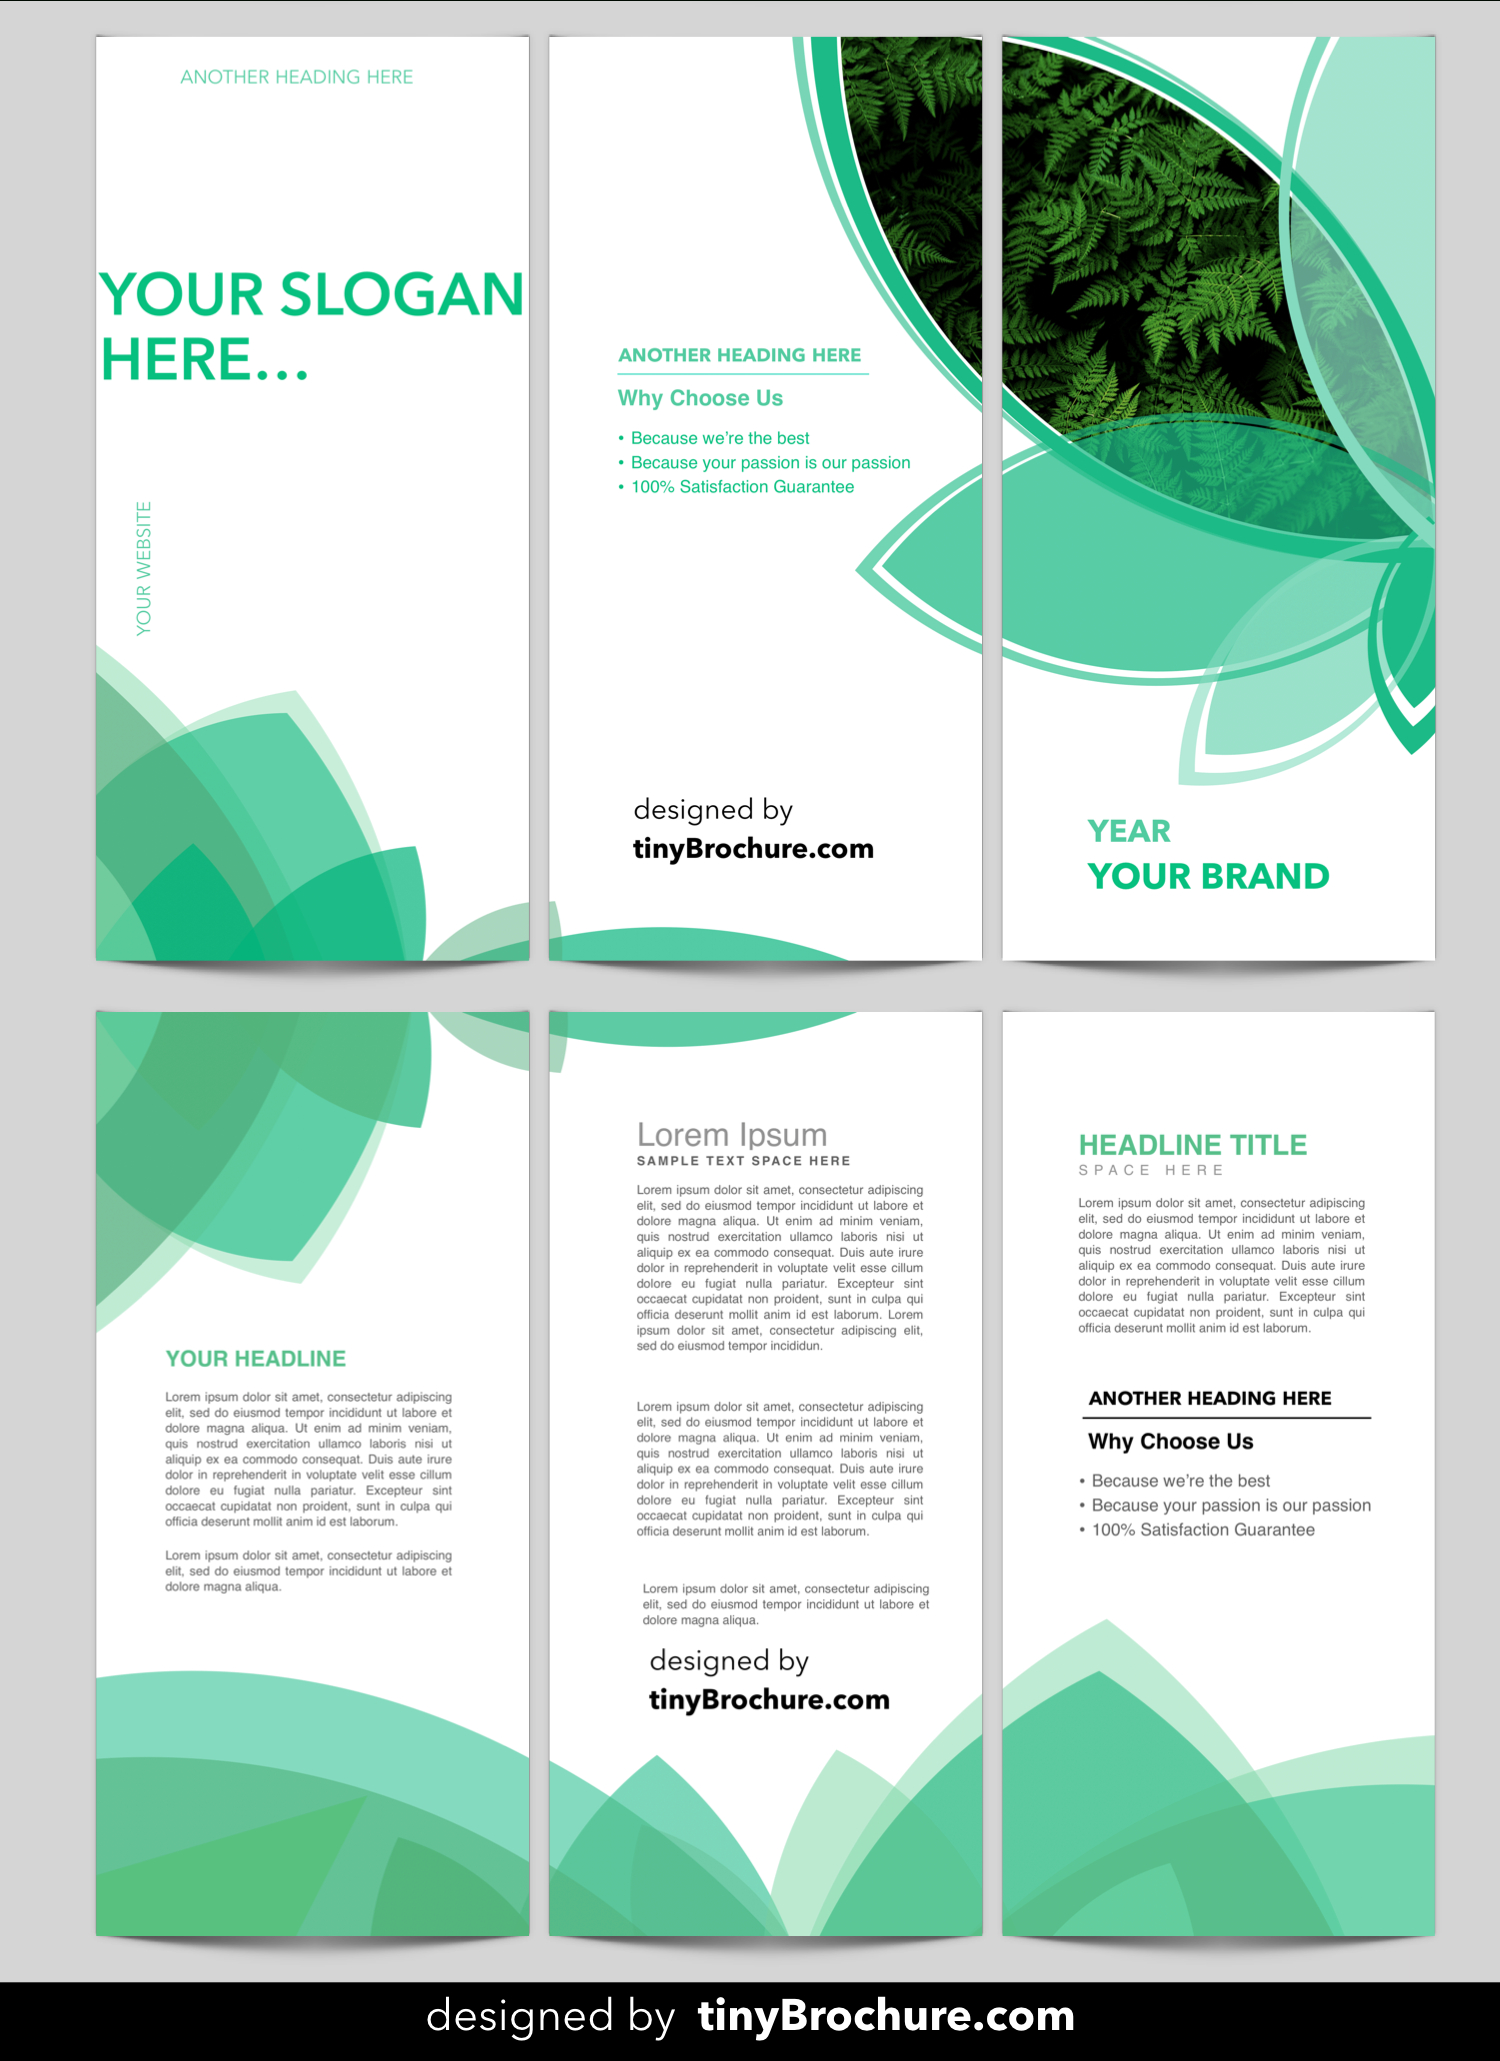 008 Free Brochure Templates For Word Template Ideas Stunning Regarding Free Brochure Templates For Word 2010